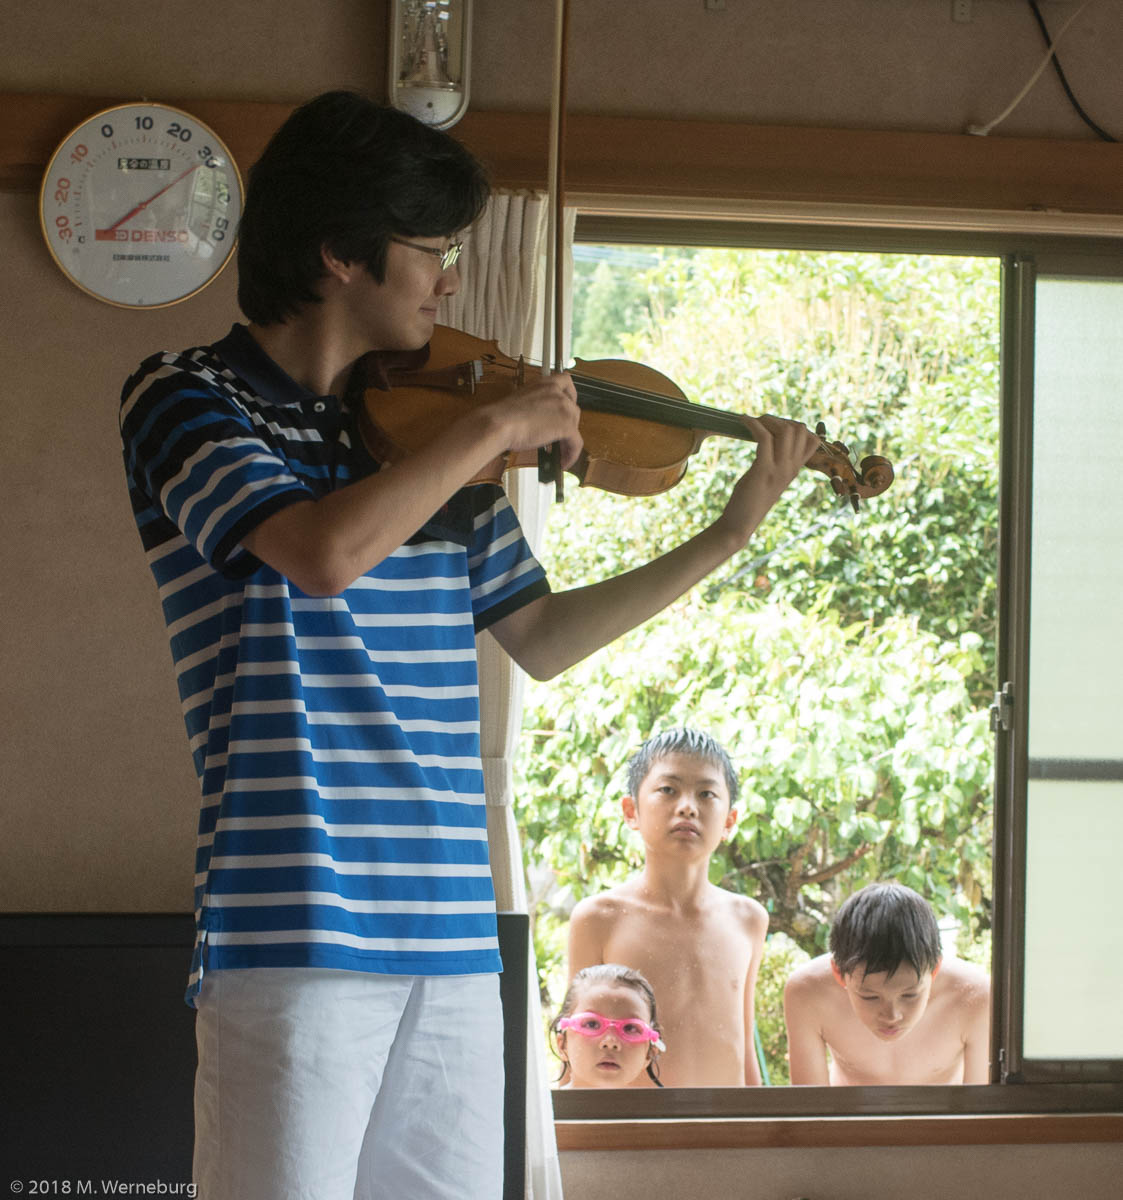 the young violinist